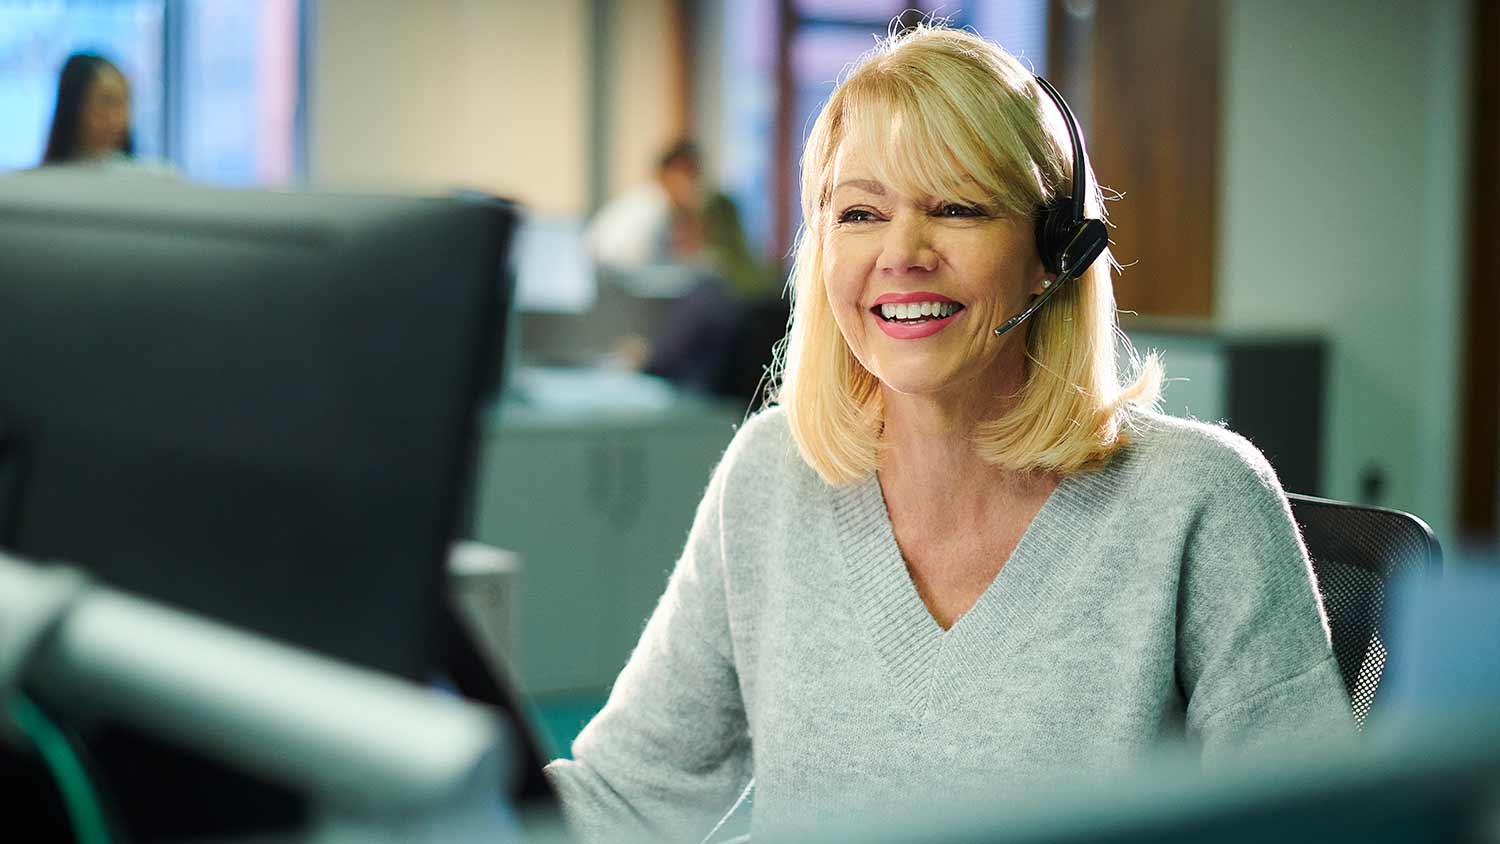 person wearing a headset talking and smiling in front of their computer